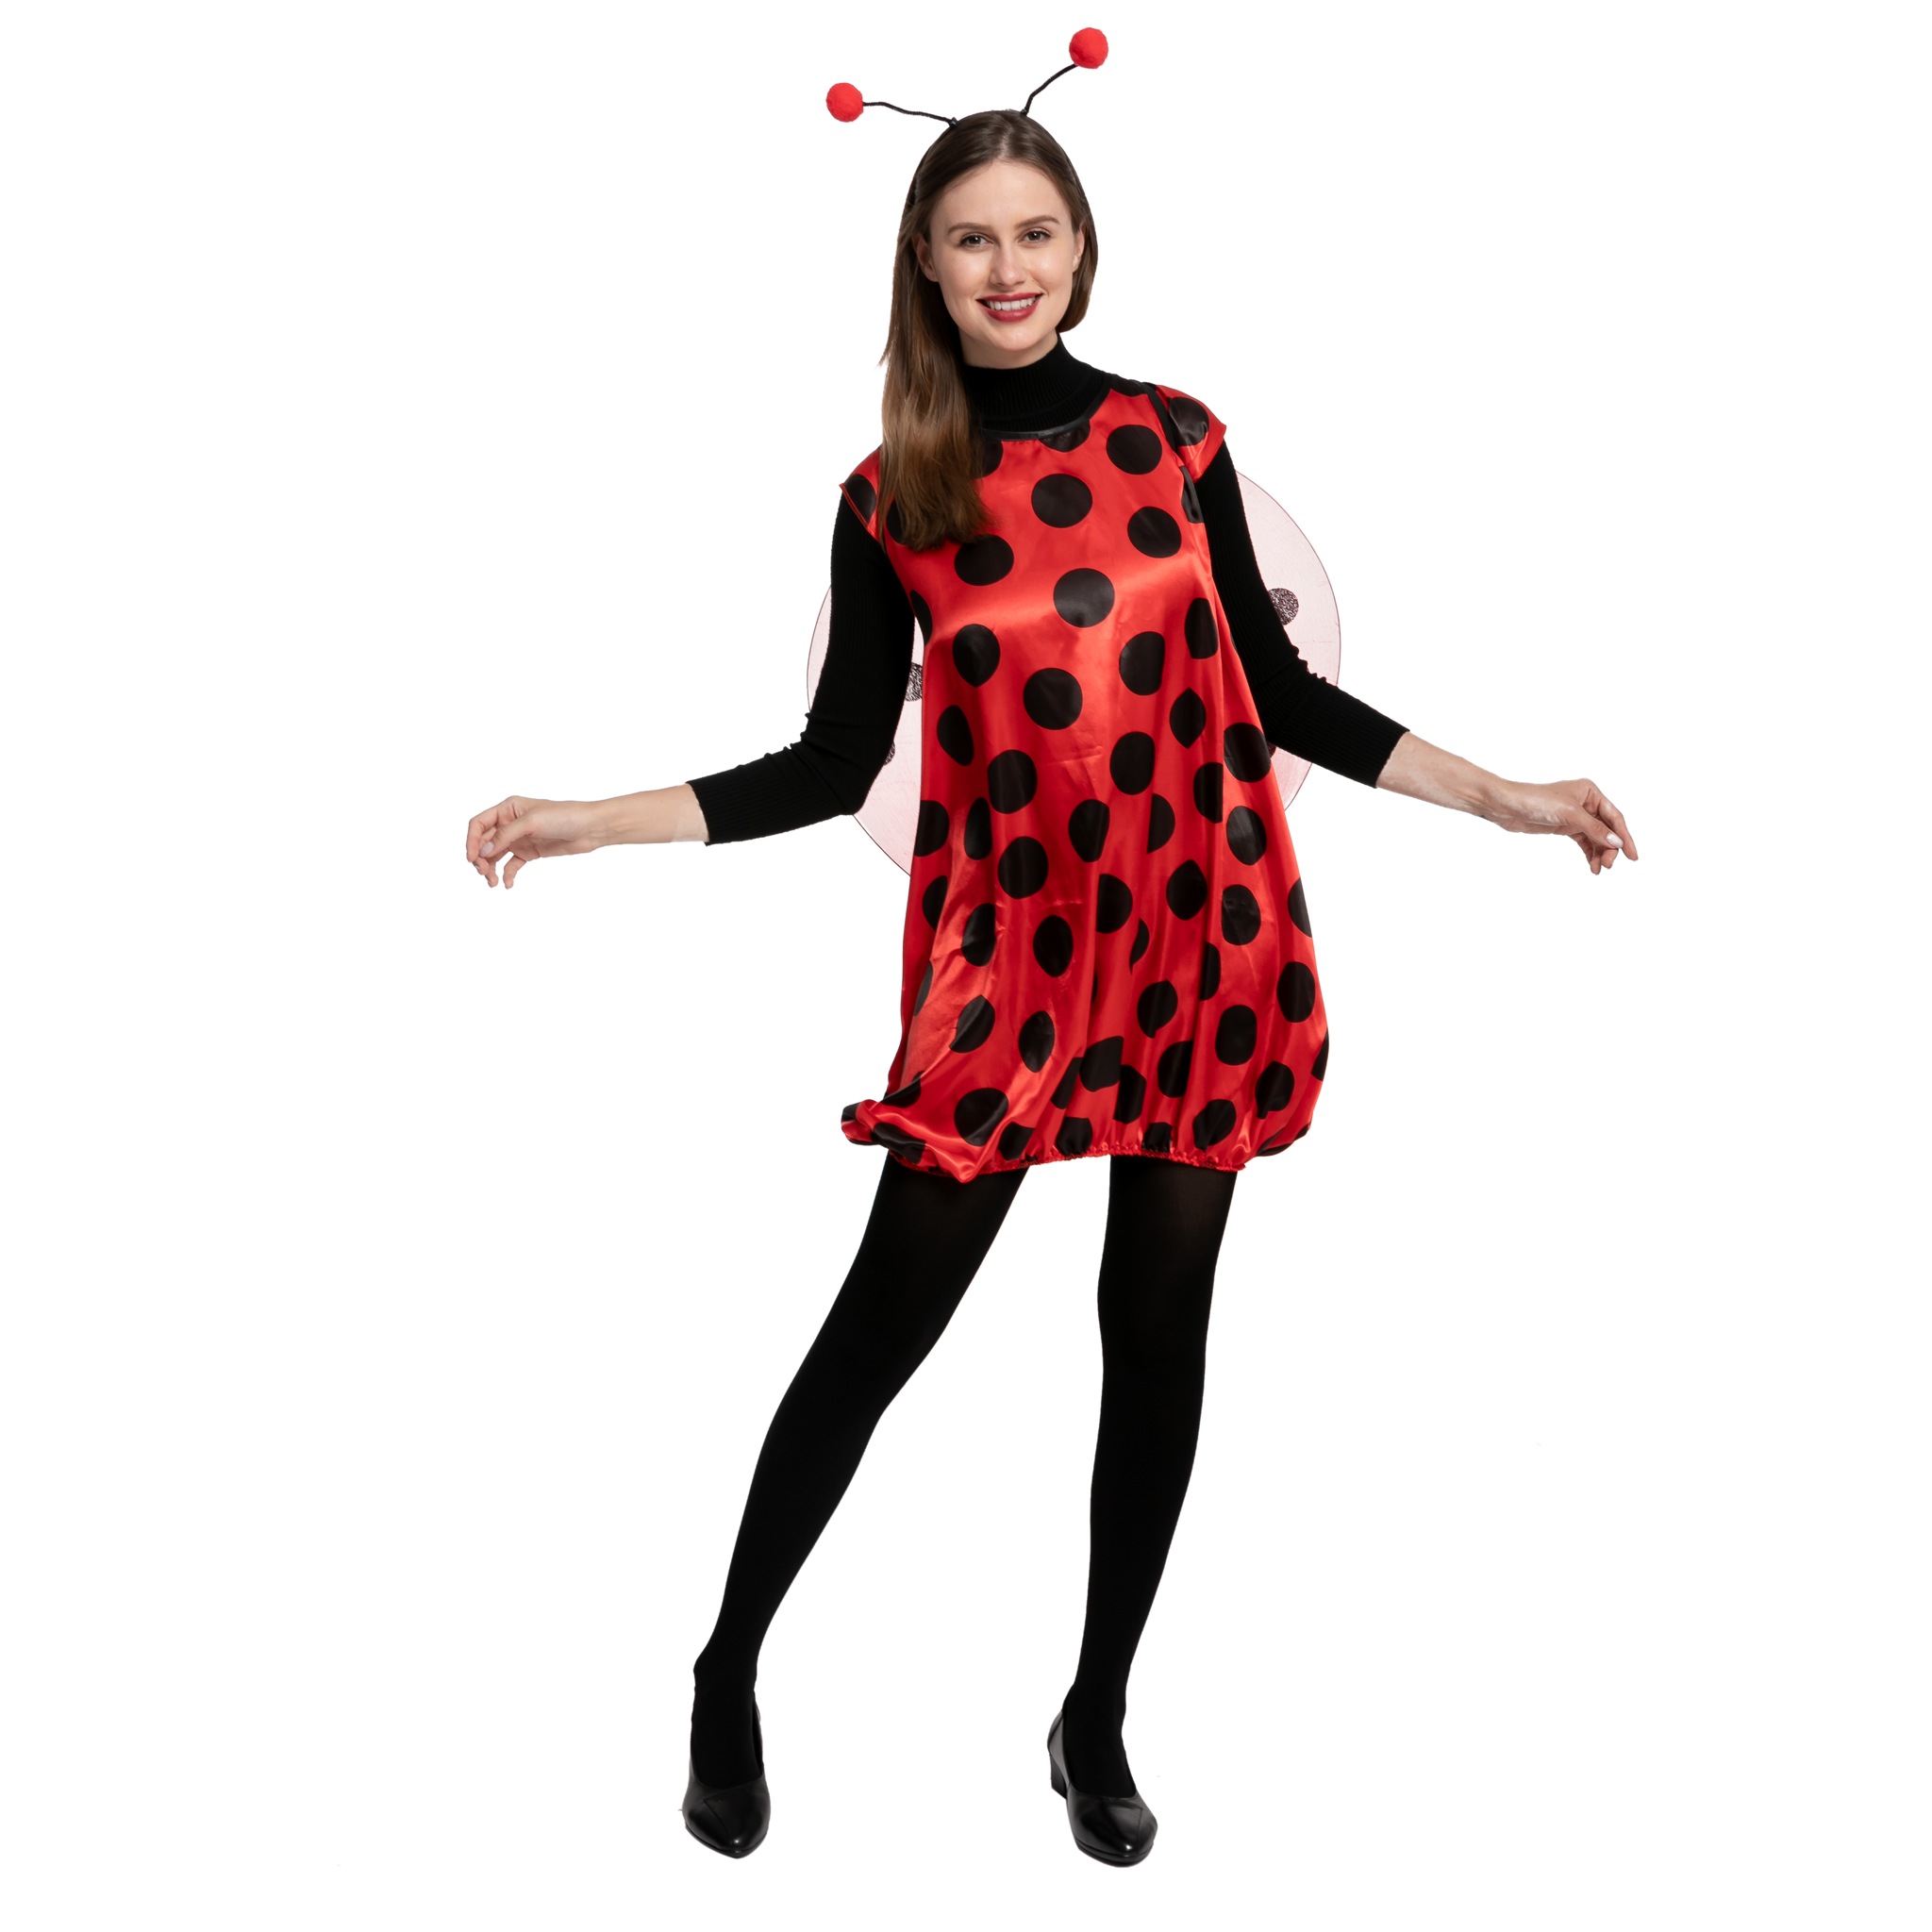 Ladybug costume for women. The coolest